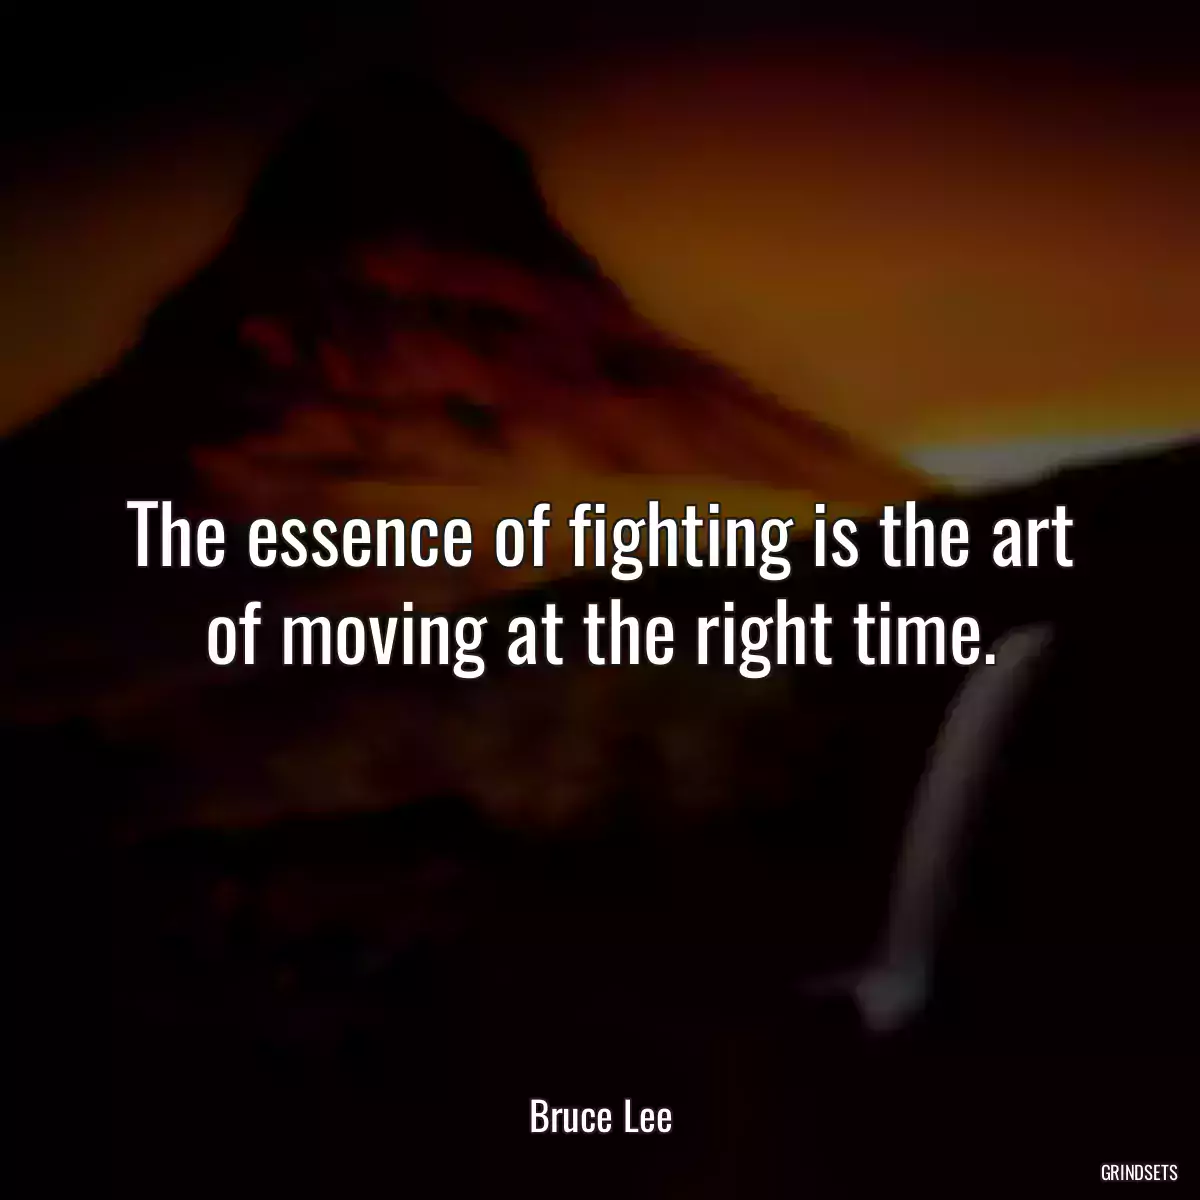 The essence of fighting is the art of moving at the right time.